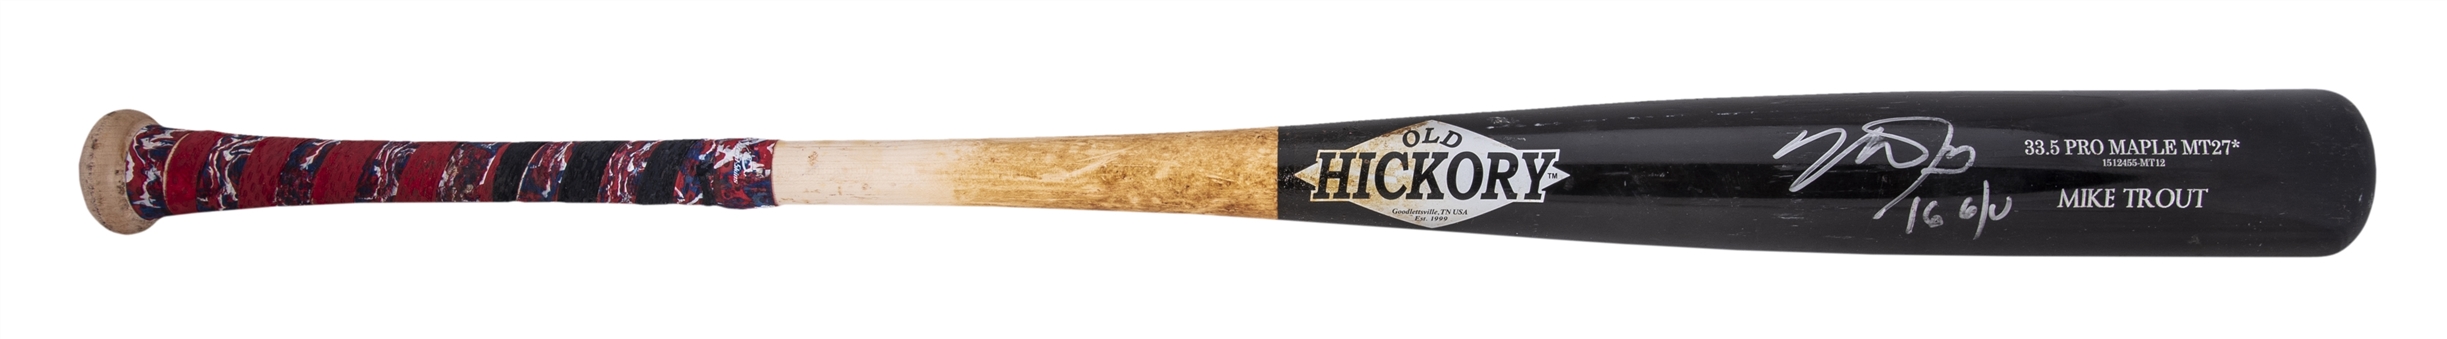 2016 Mike Trout Game Used & Signed Old Hickory MT27* Model Bat (Anderson LOA & PSA/DNA GU 10)